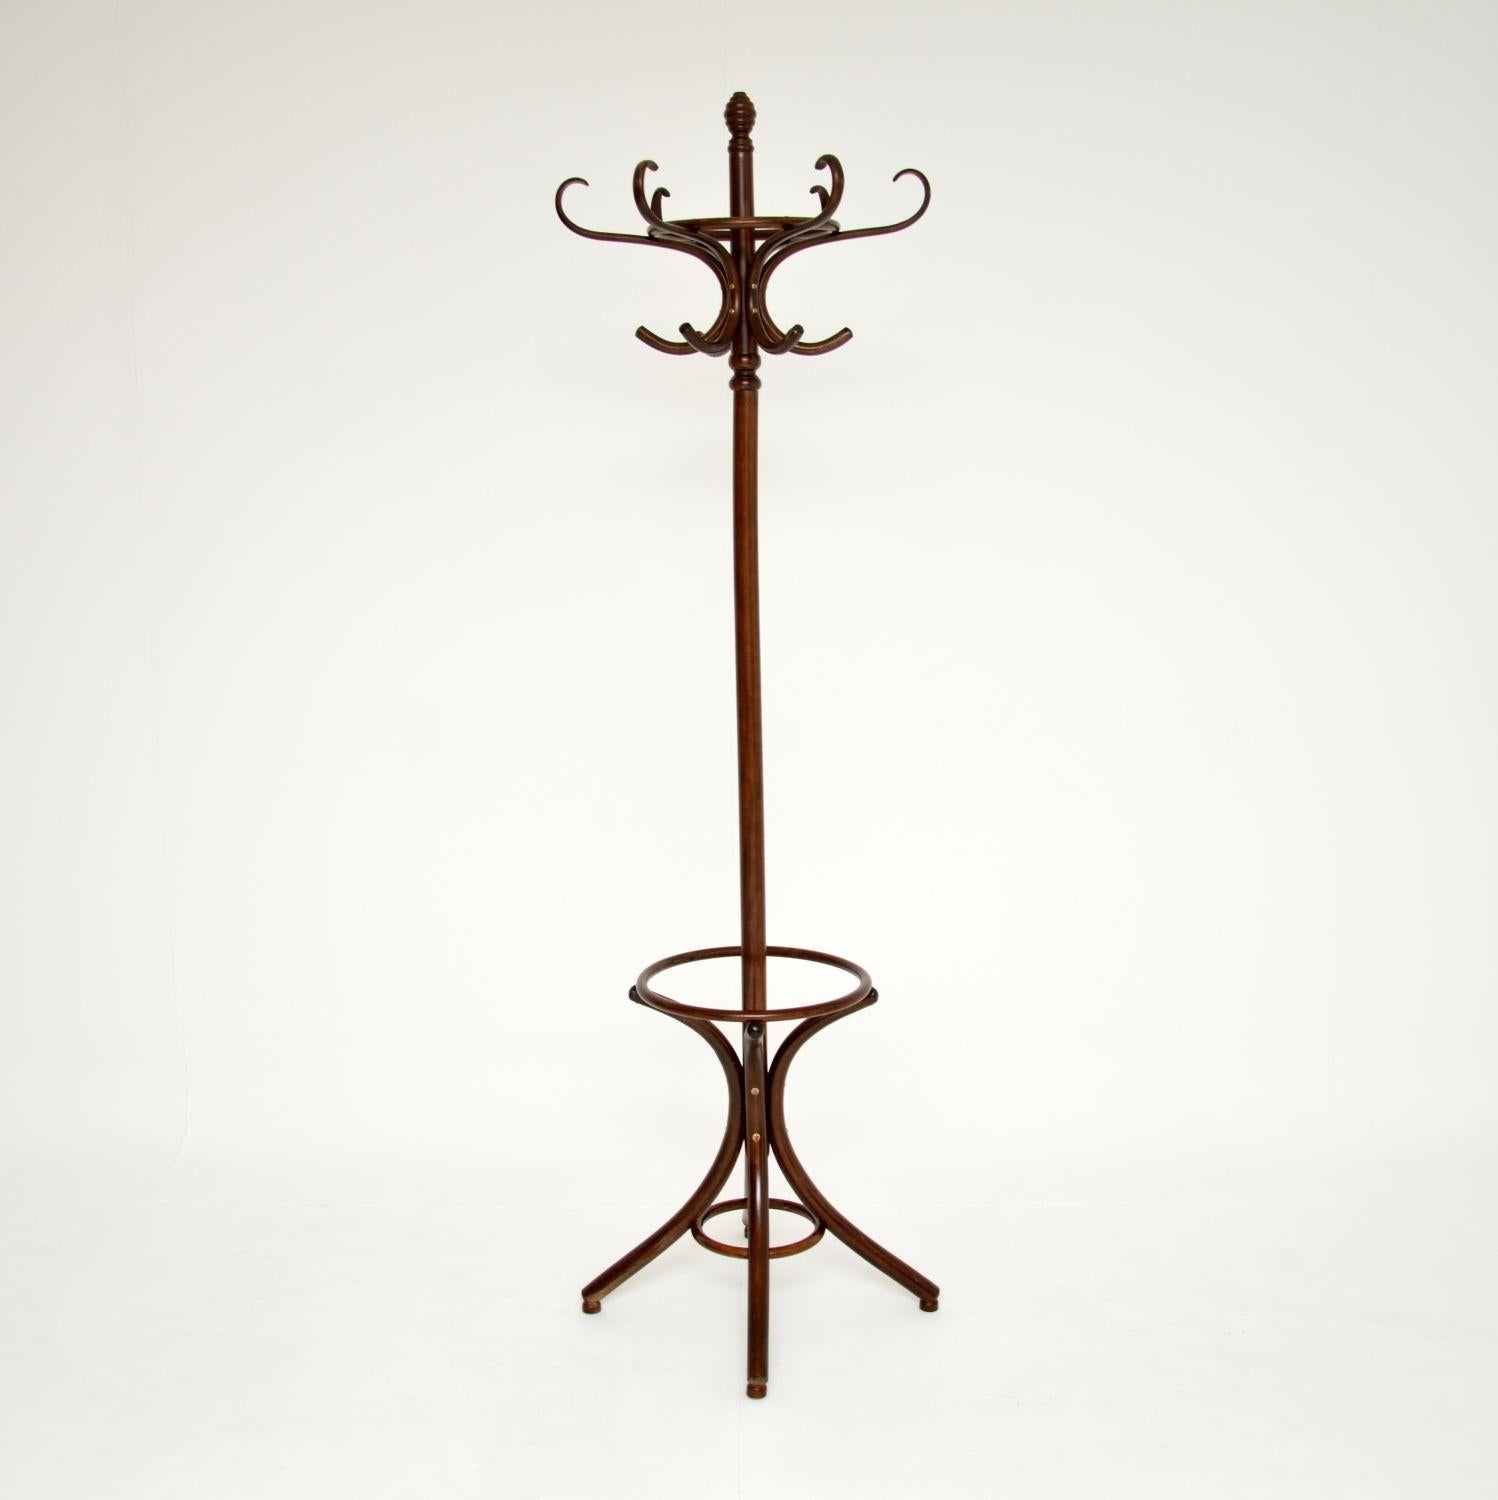 An amazing original antique bentwood hatstand. This was made in central Europe, most likely by Thonet in Austria around the 1950’s period.

It is a lovely model, with a beautifully curvaceous base. It has eight beautifully curved supports on the